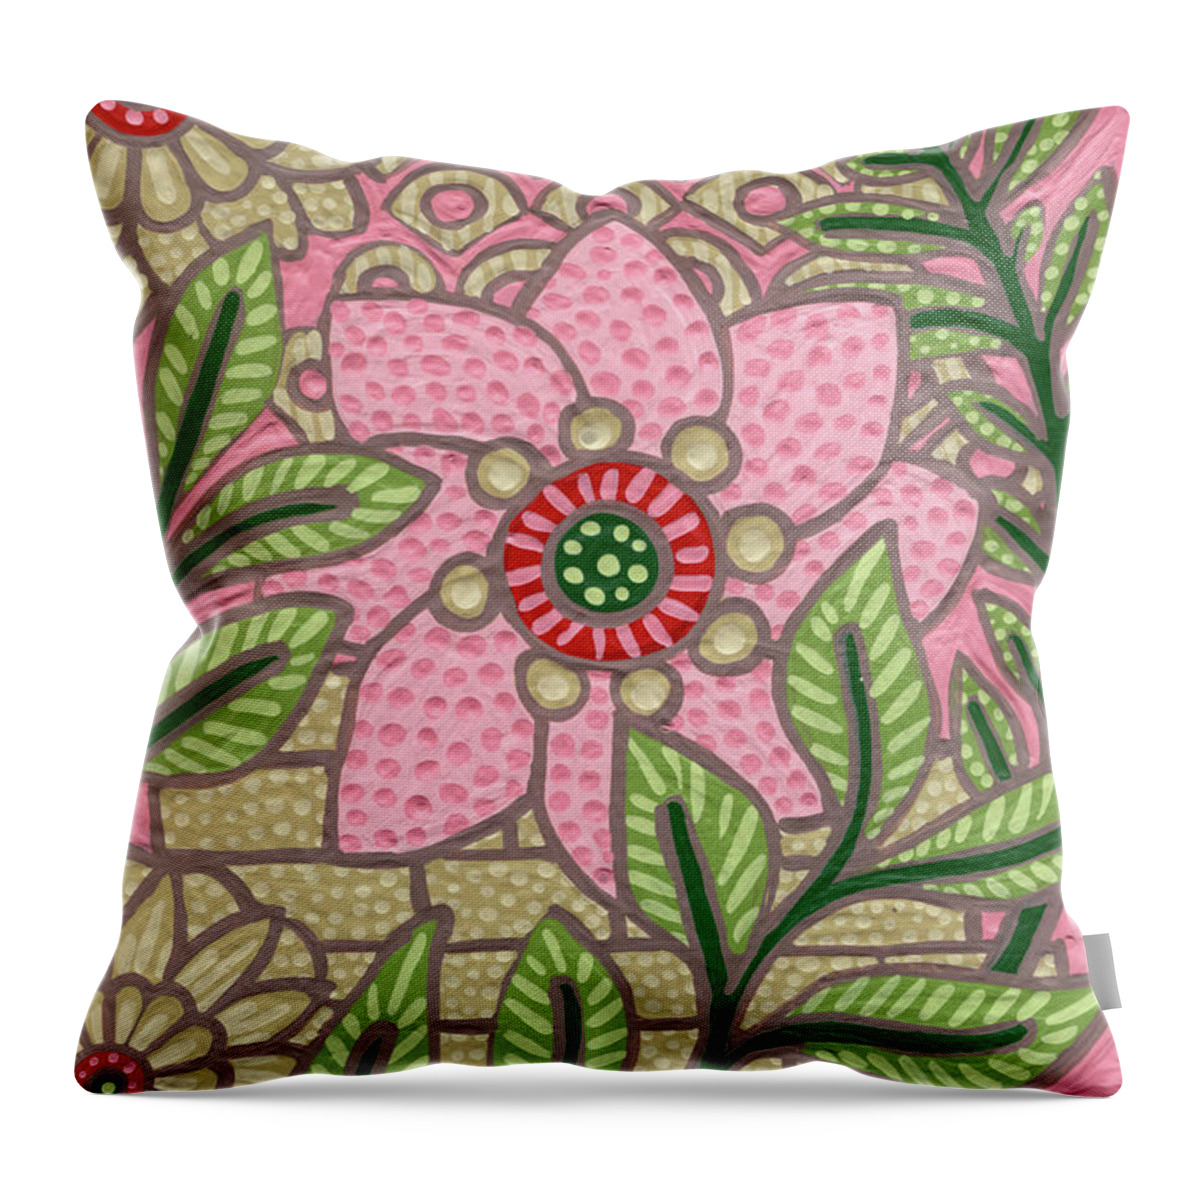 Leaf Throw Pillow featuring the painting Leaf And Design Carnation Pink 5 by Amy E Fraser